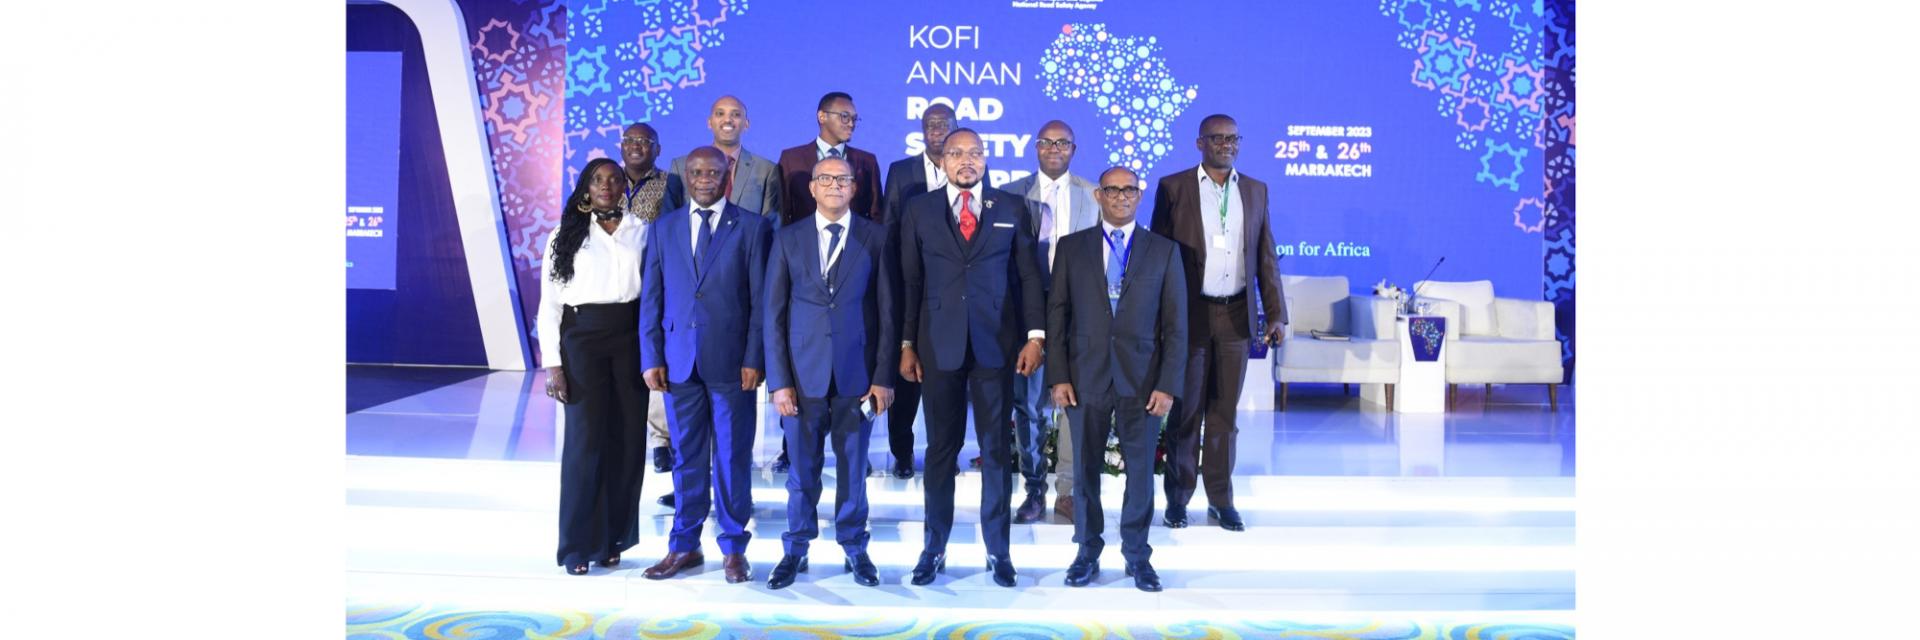 Morocco hosts the Second Edition of the Kofi Annan Road Safety Award